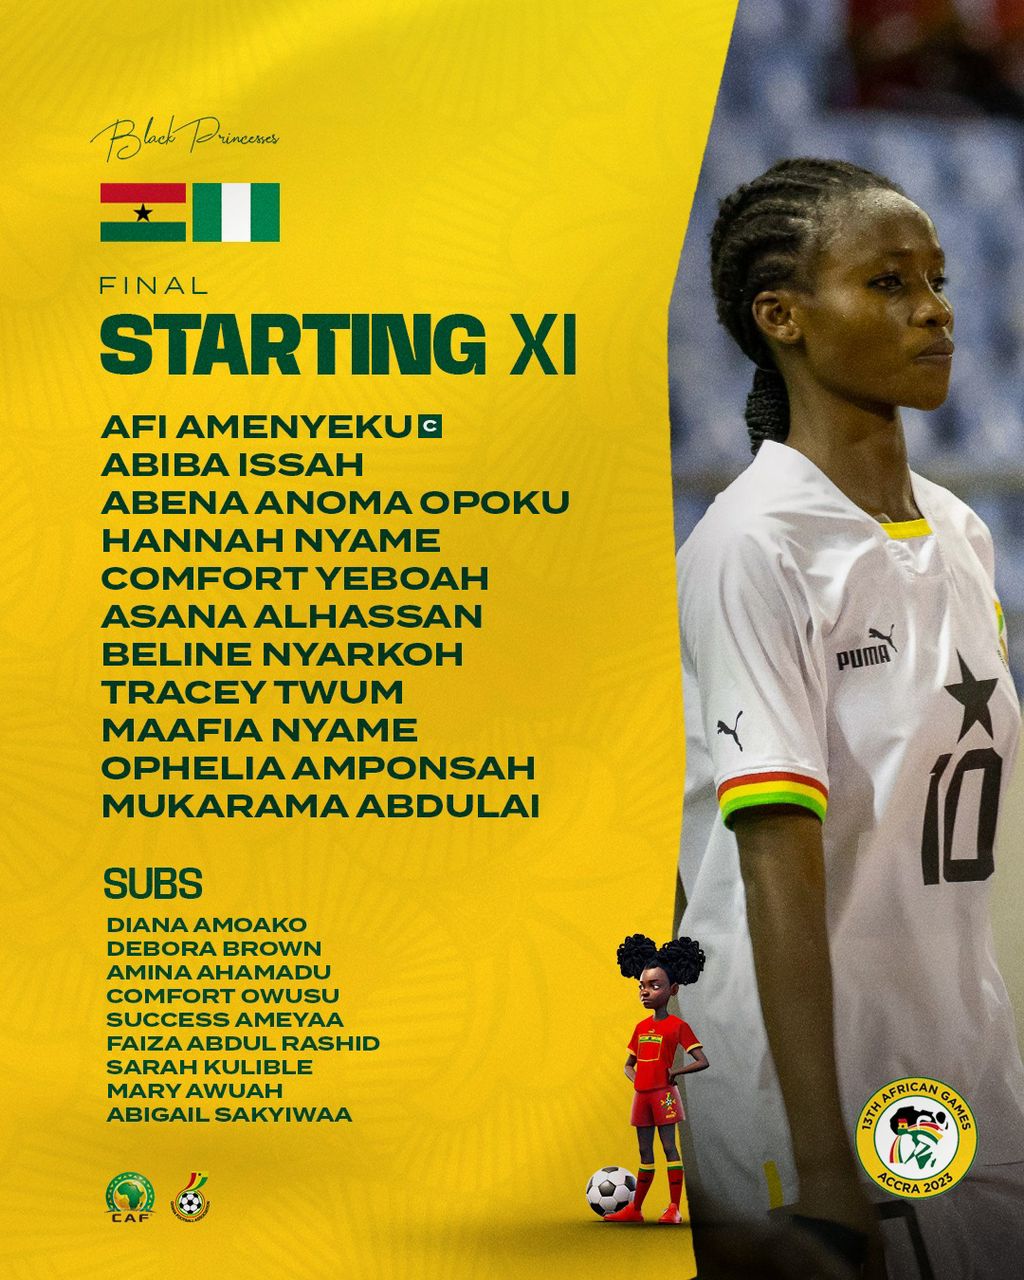 Yussif Basigi names starting line up for African Games final against Nigeria